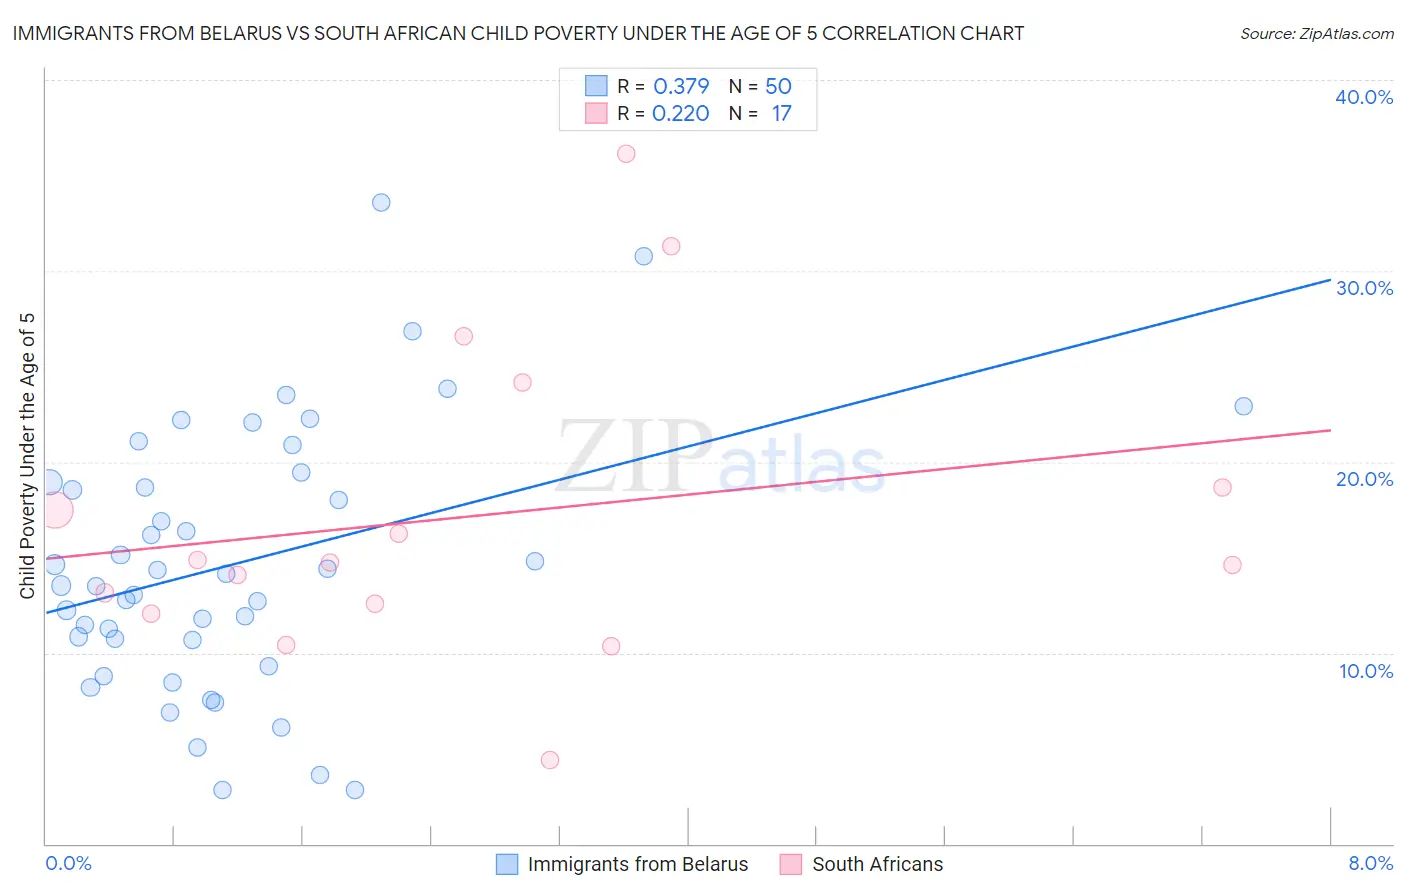 Immigrants from Belarus vs South African Child Poverty Under the Age of 5